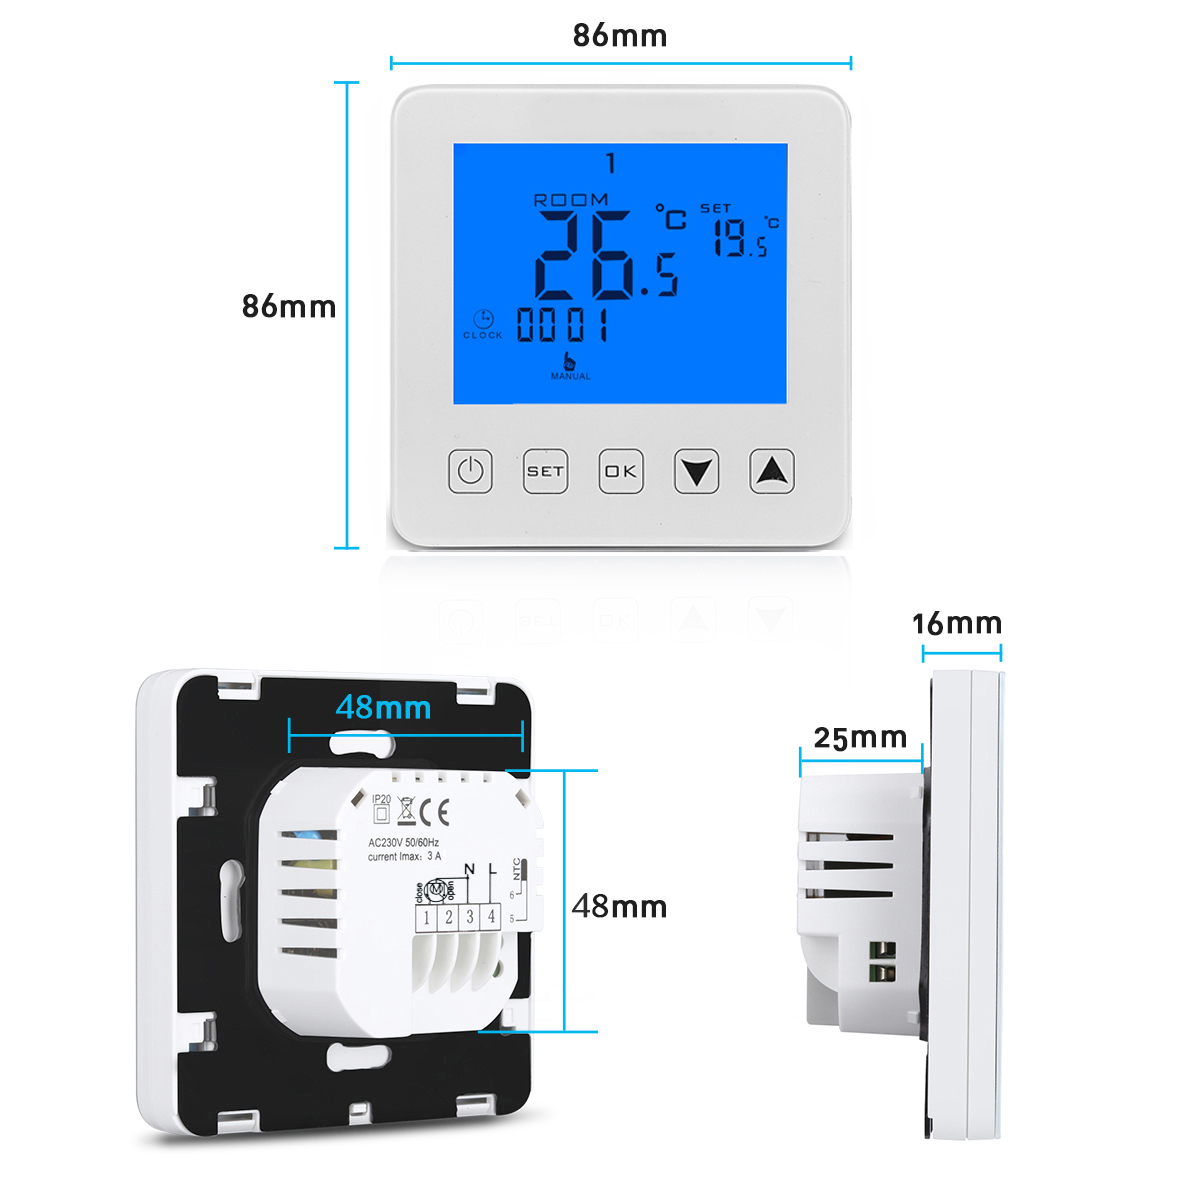 LCD screen touch radiator thermostat electronic programmable heating temperature controller heating distributor controller